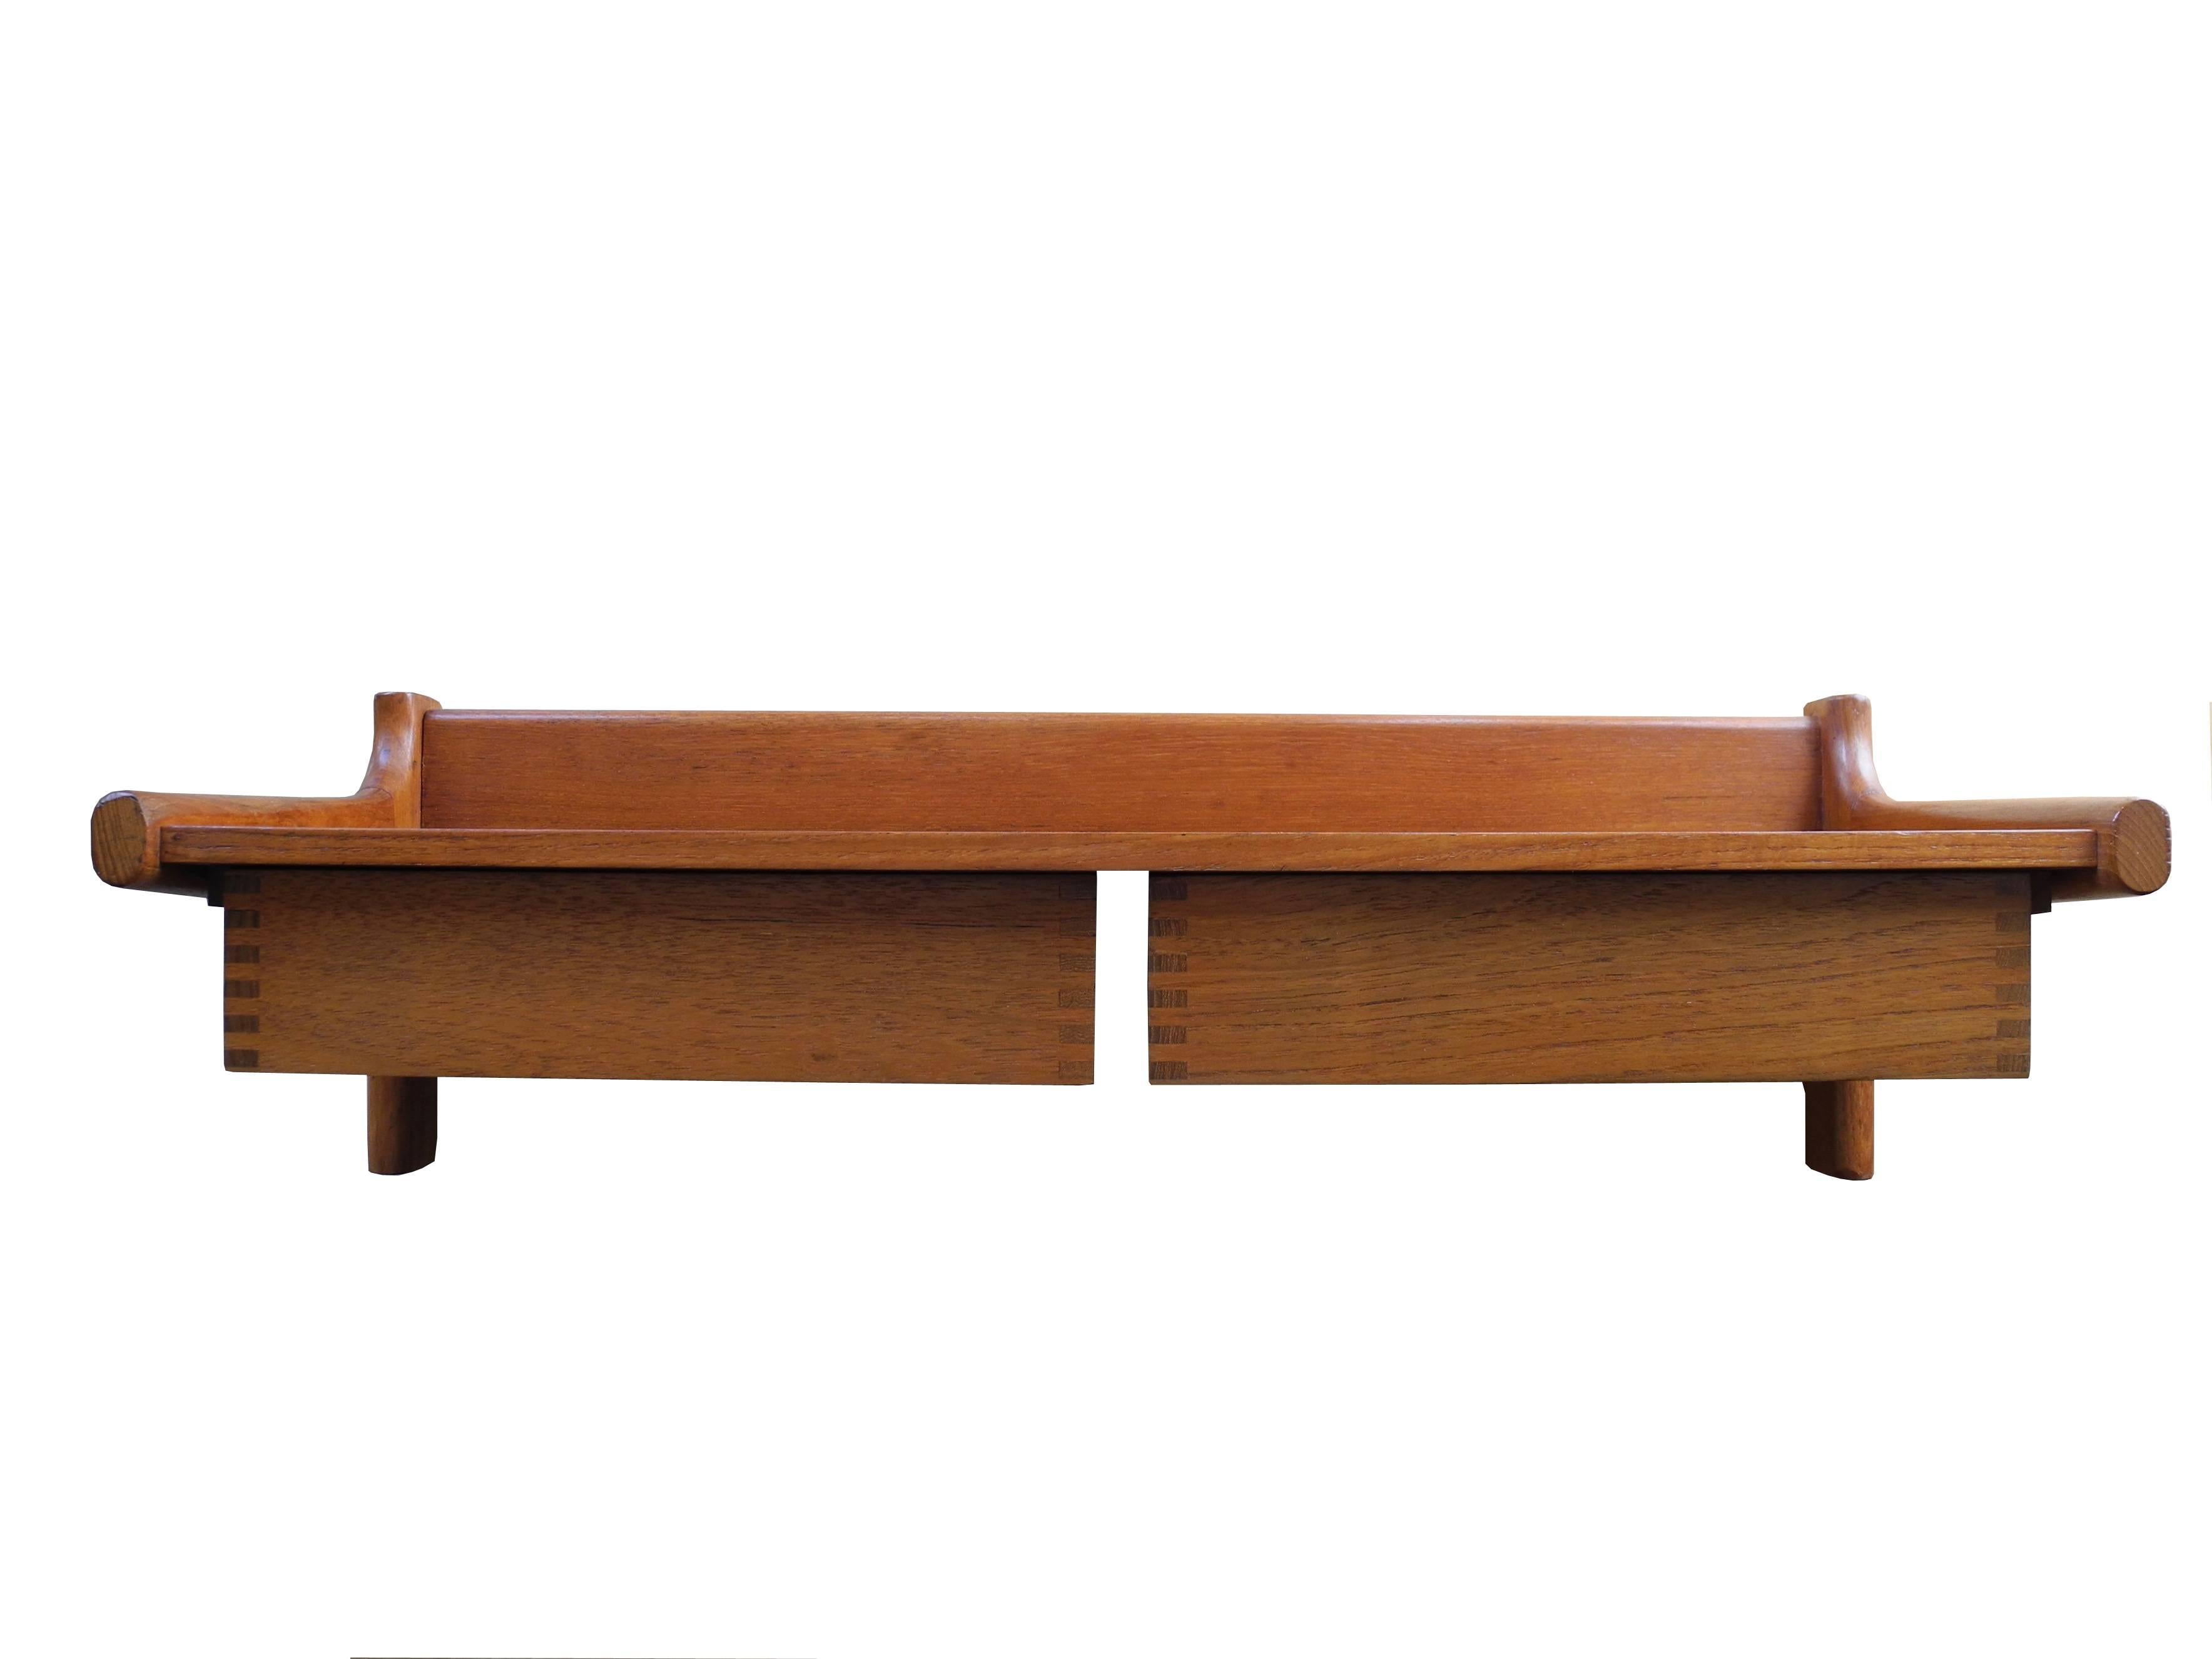 This teak double drawer bedside shelf is a Danish design by Børge Mogensen. It hangs on the wall so it can be adjusted at any height. There is a matching single drawer available as well. See photos.
 